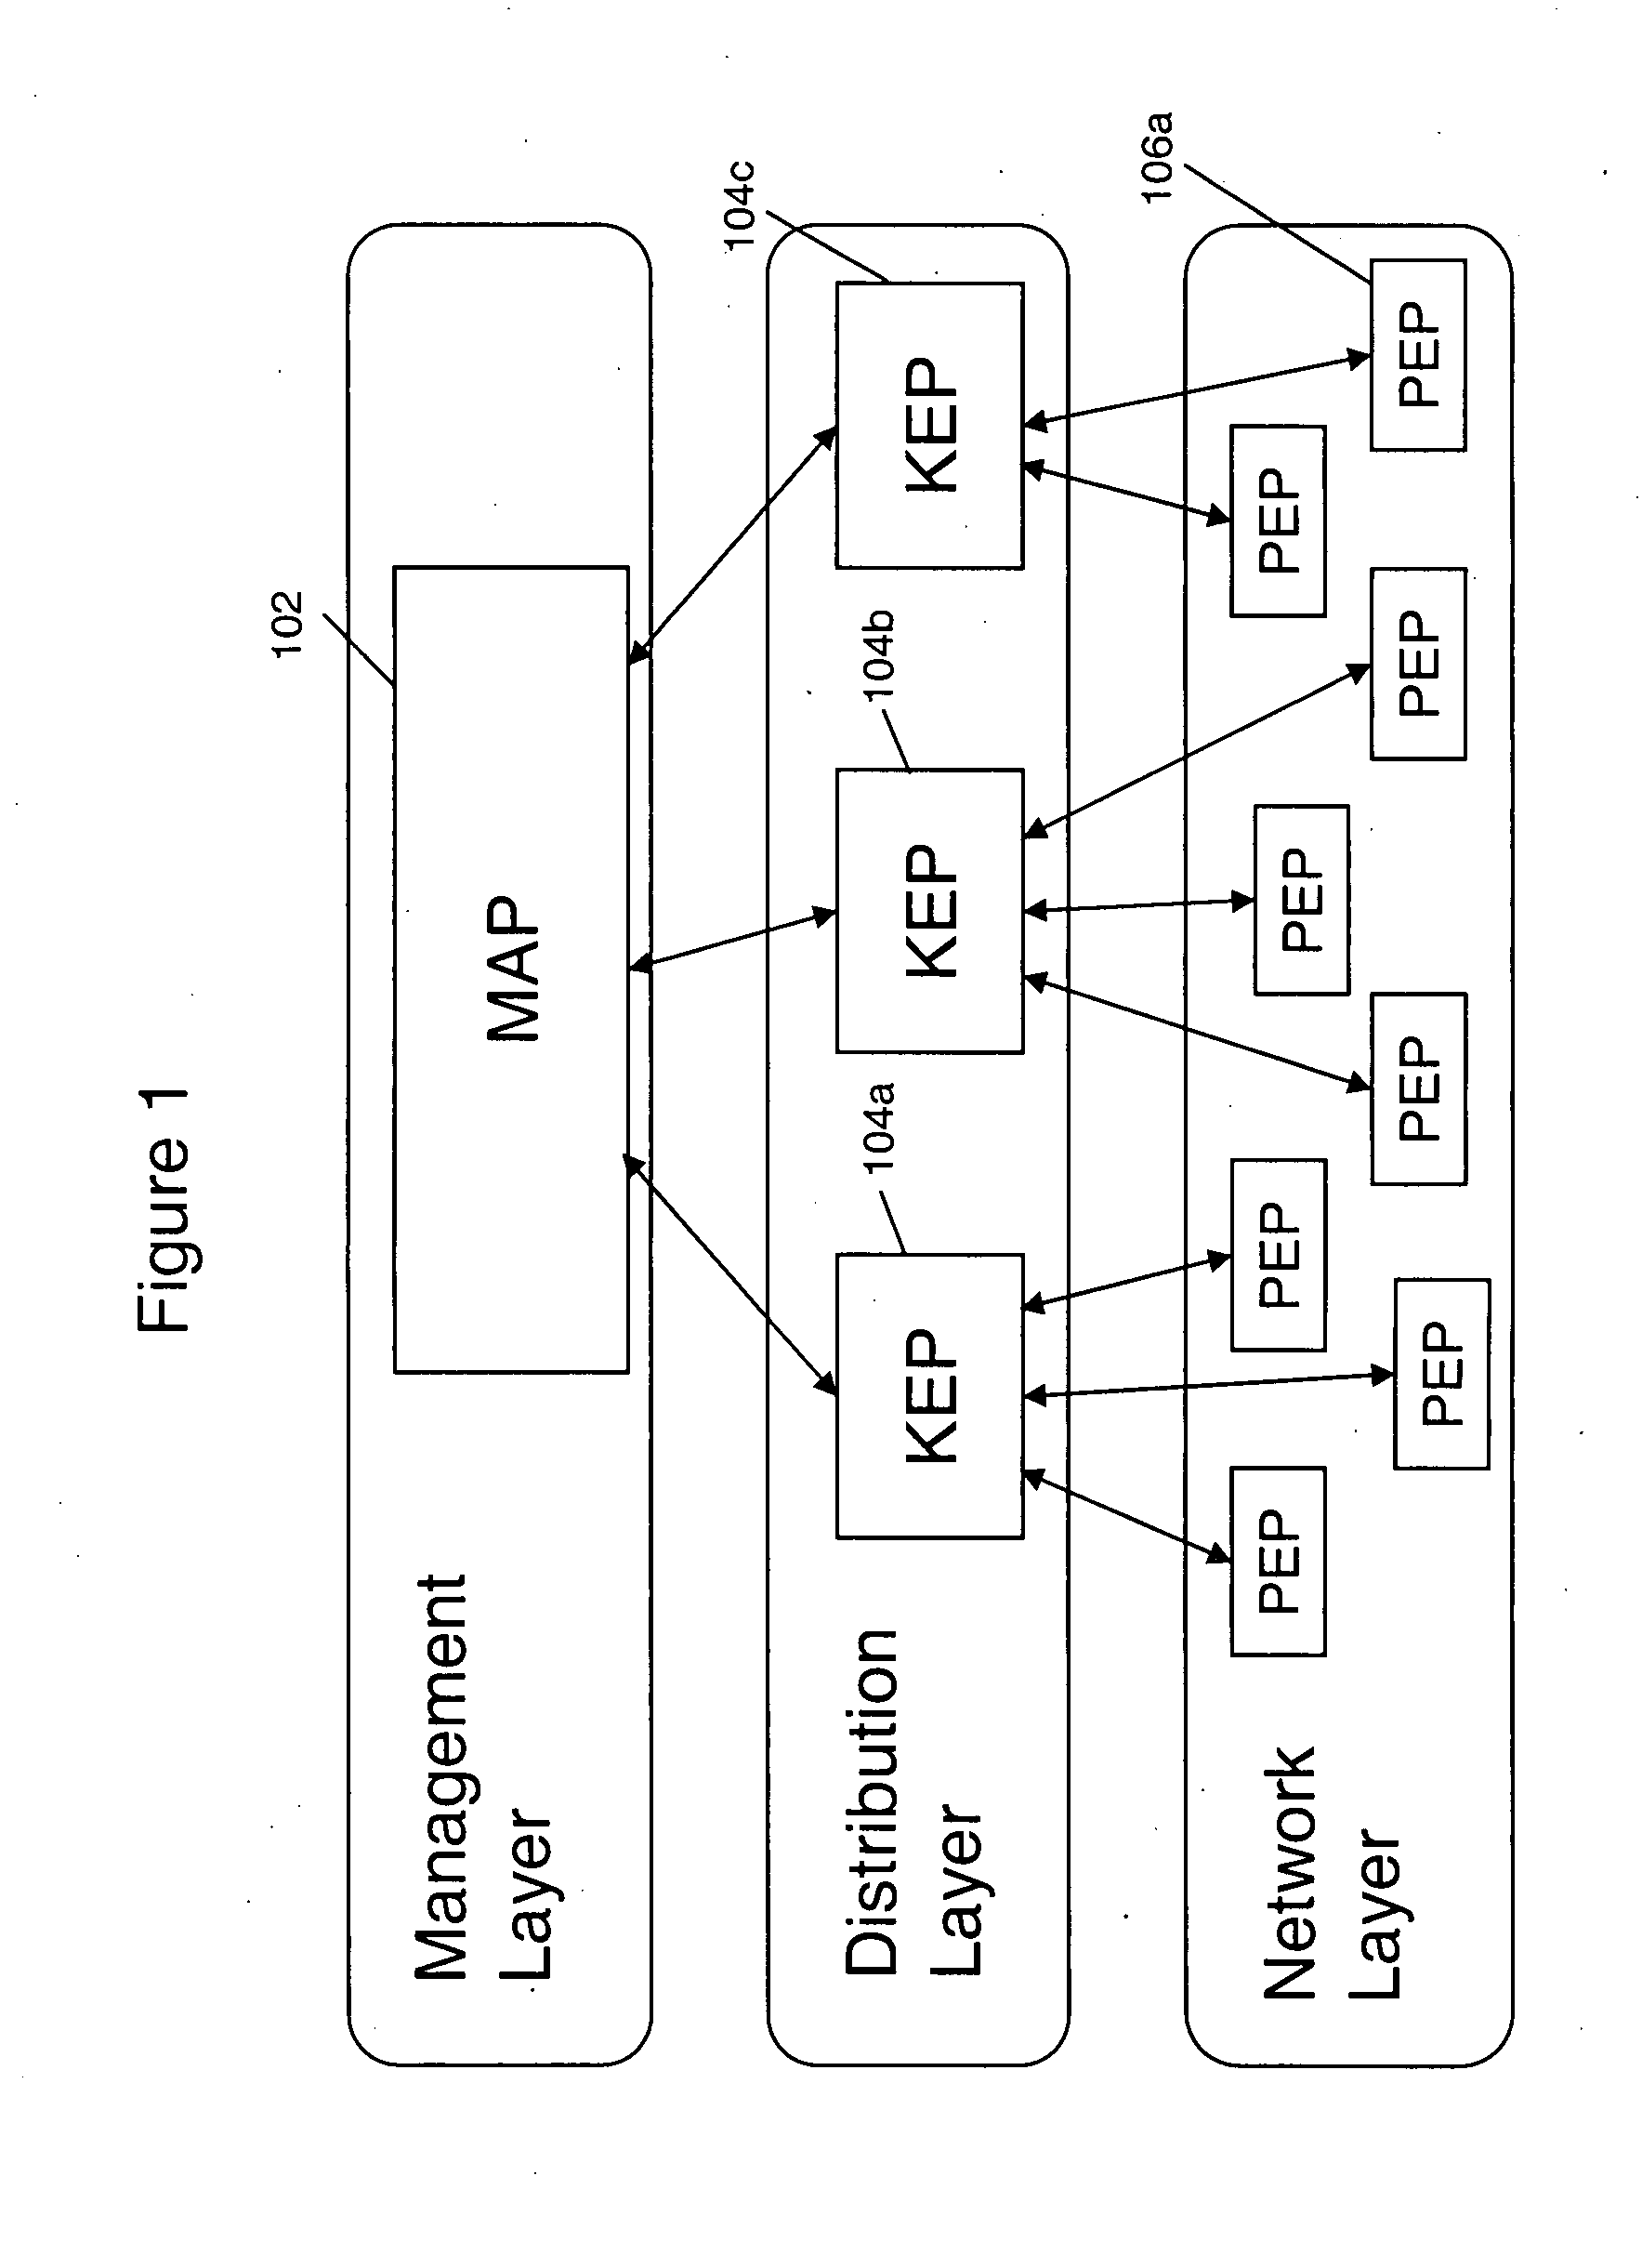 Method and apparatus for securing layer 2 networks